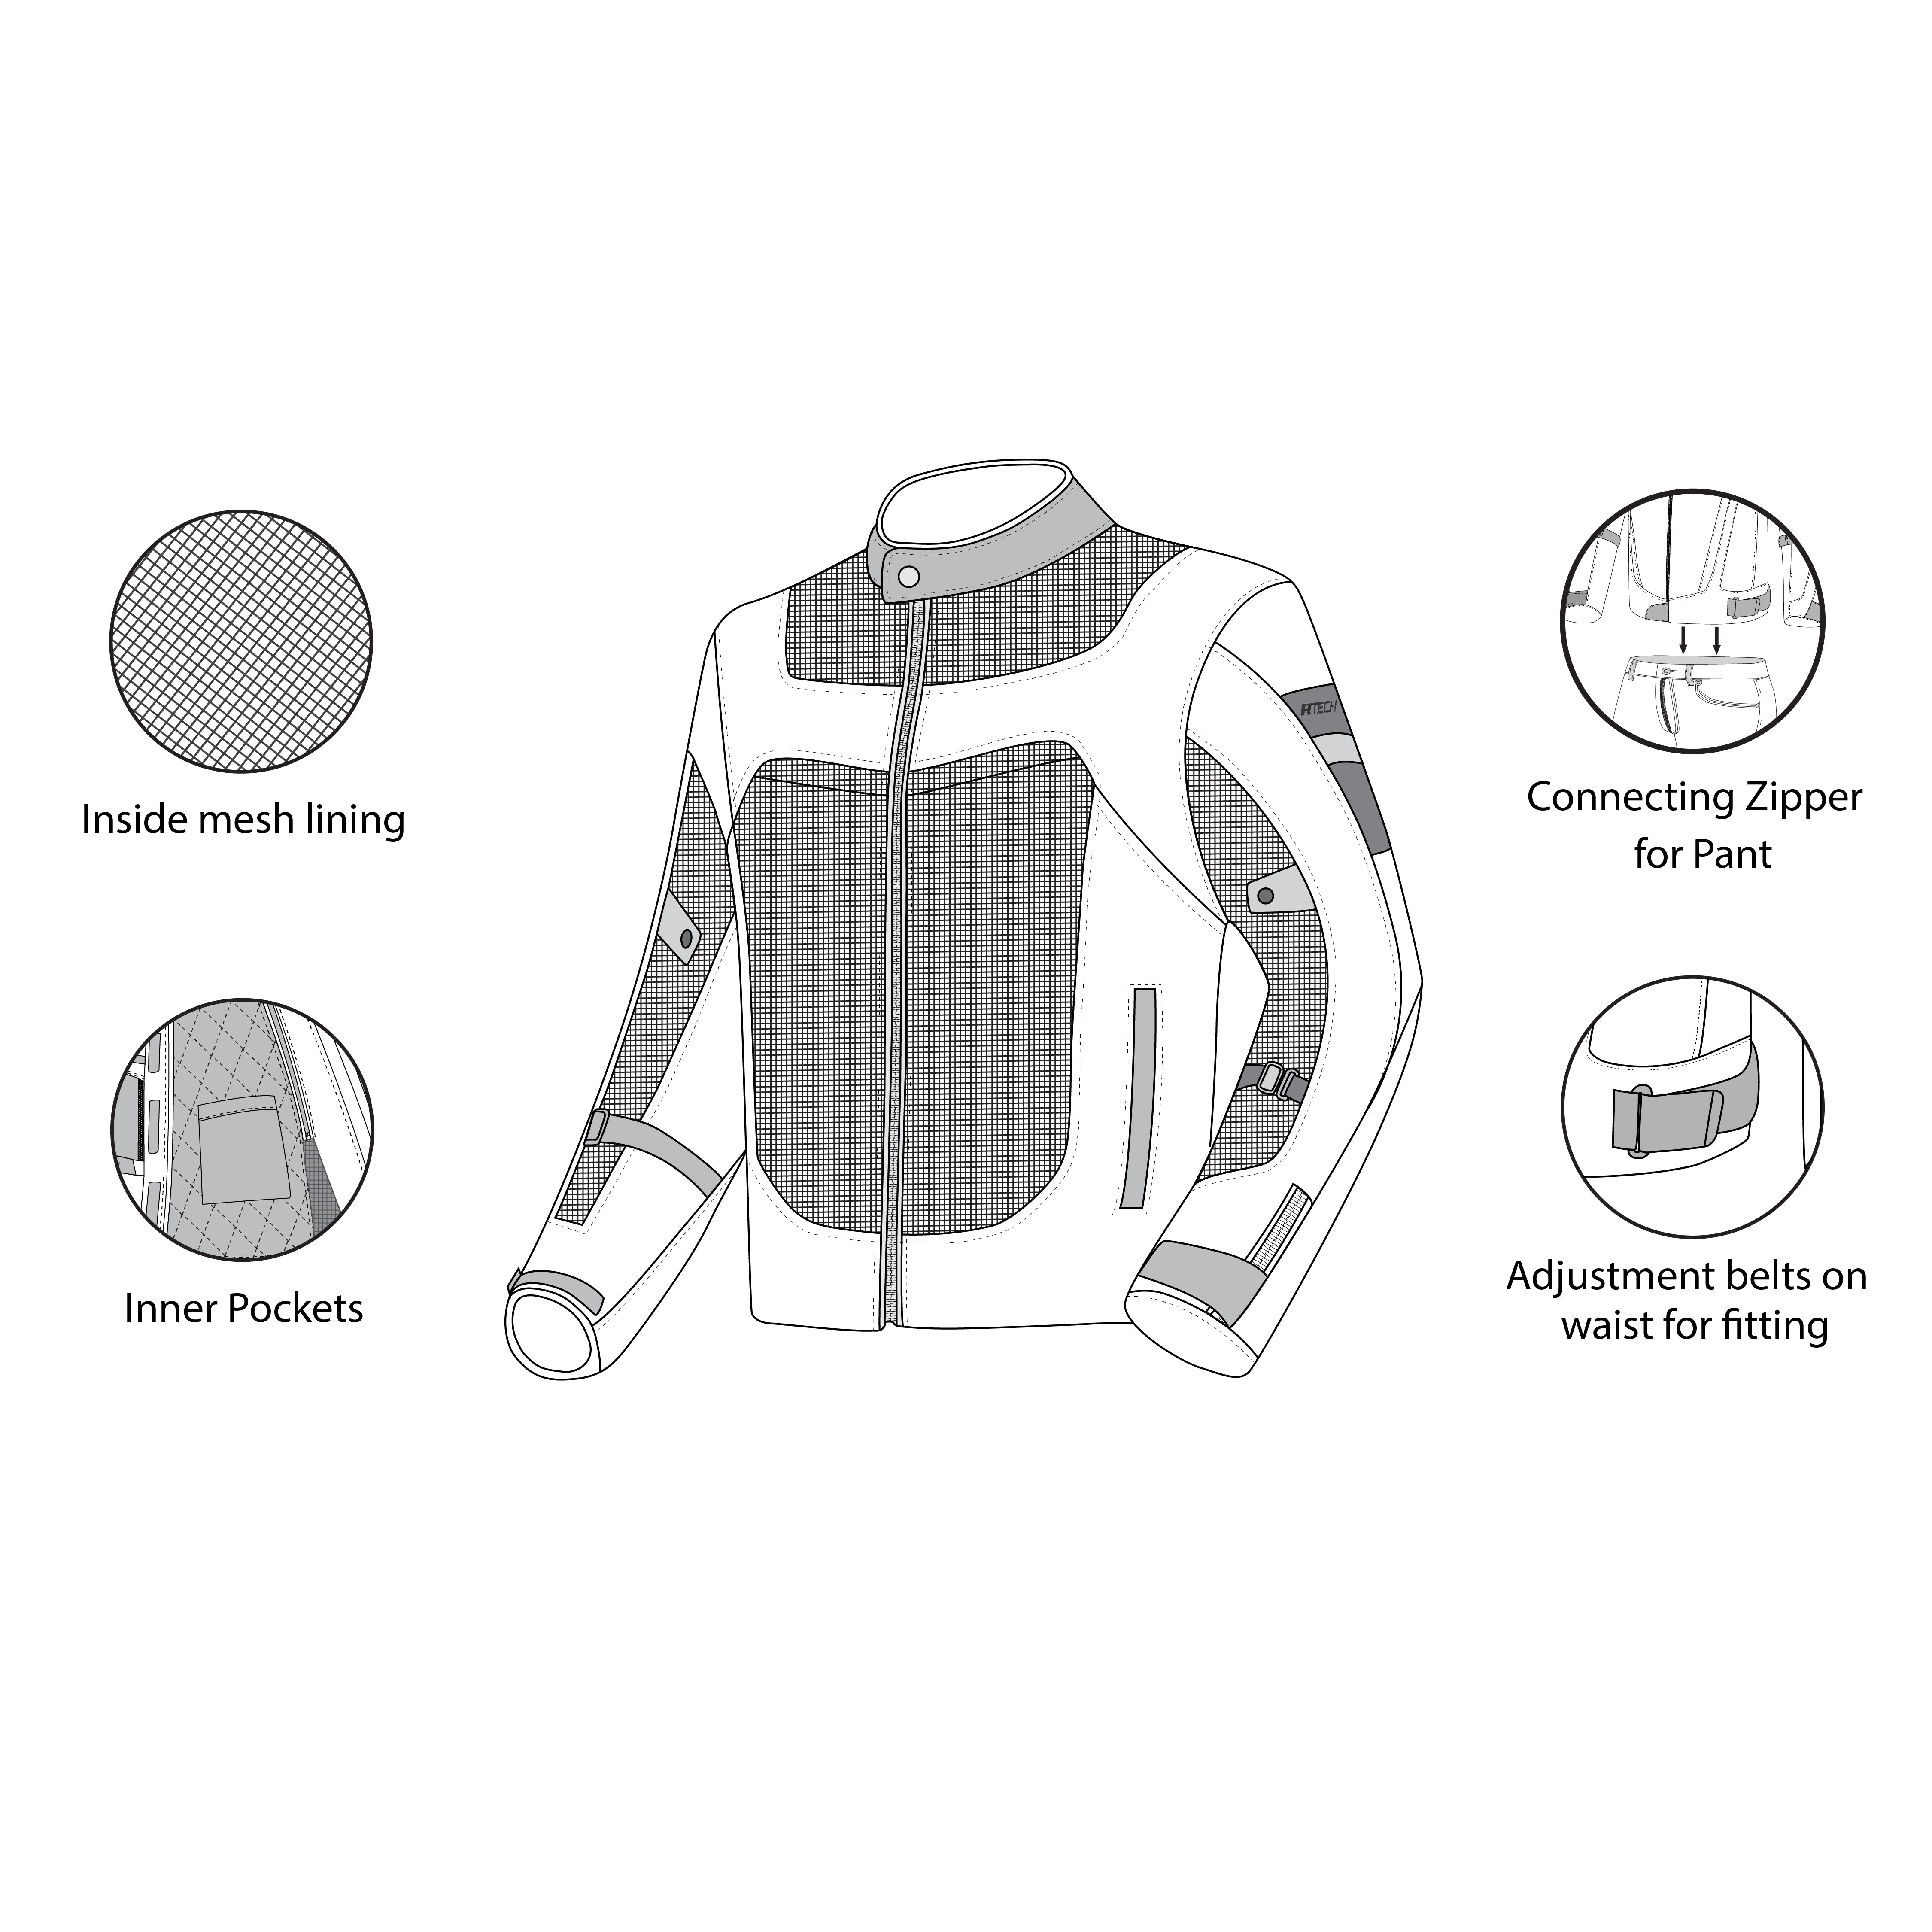 infographic sketch r-tech spiral mesh textile jacket Anthracite-Grey and Green top front side view